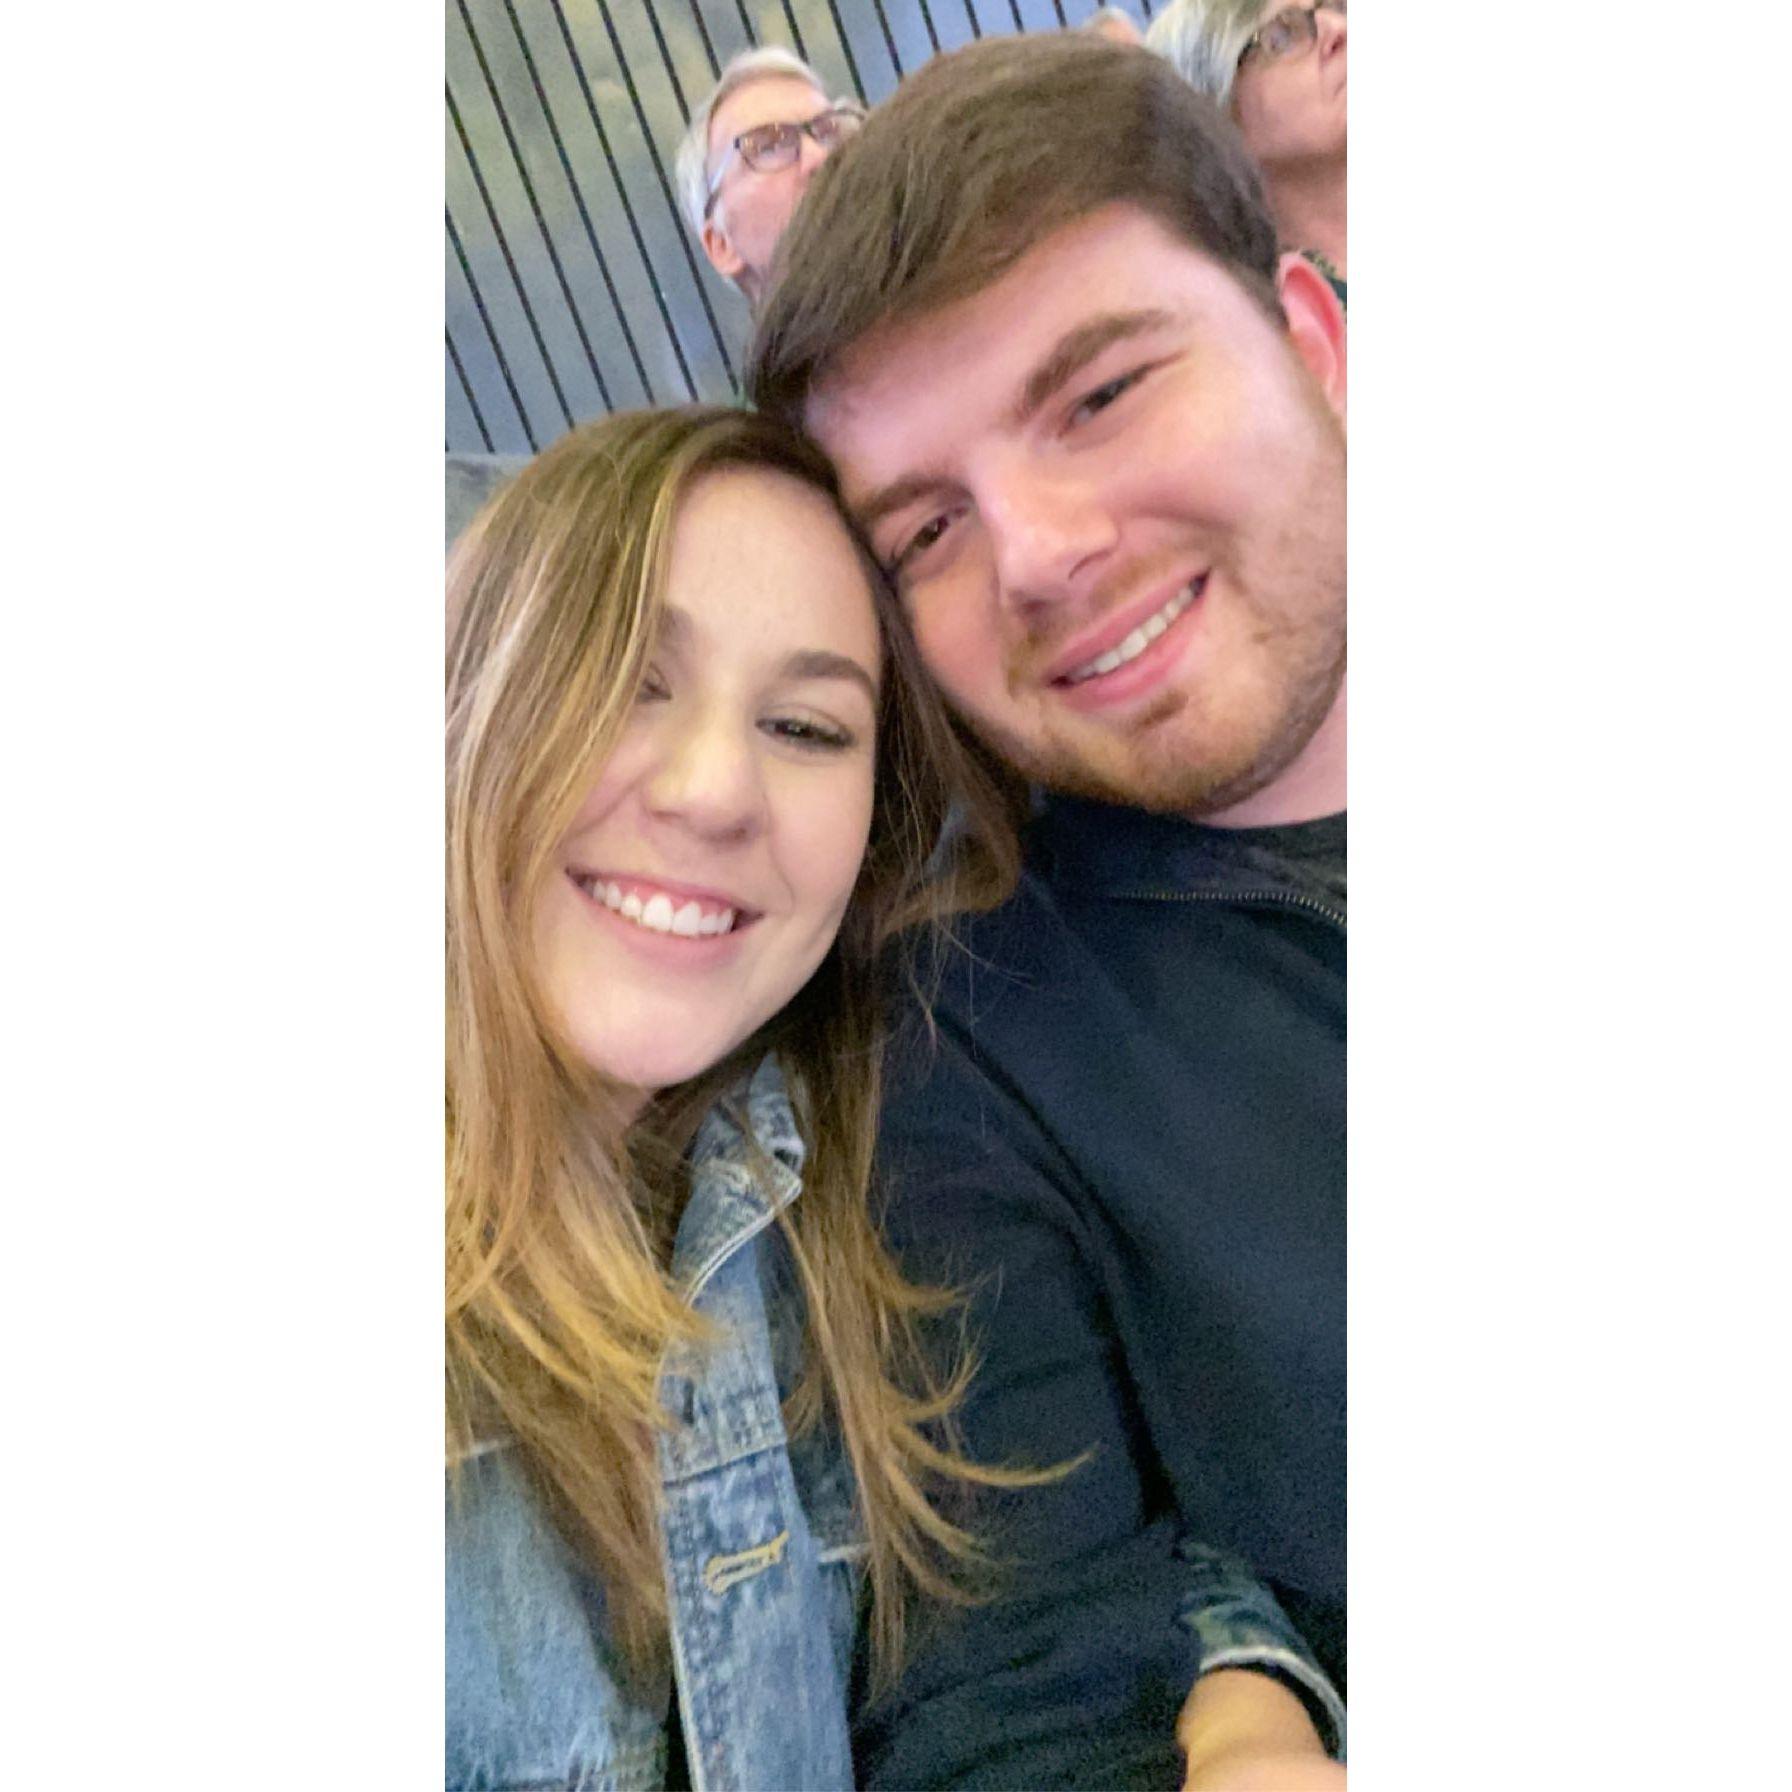 The night we first said "I love you", at a Nets Game!